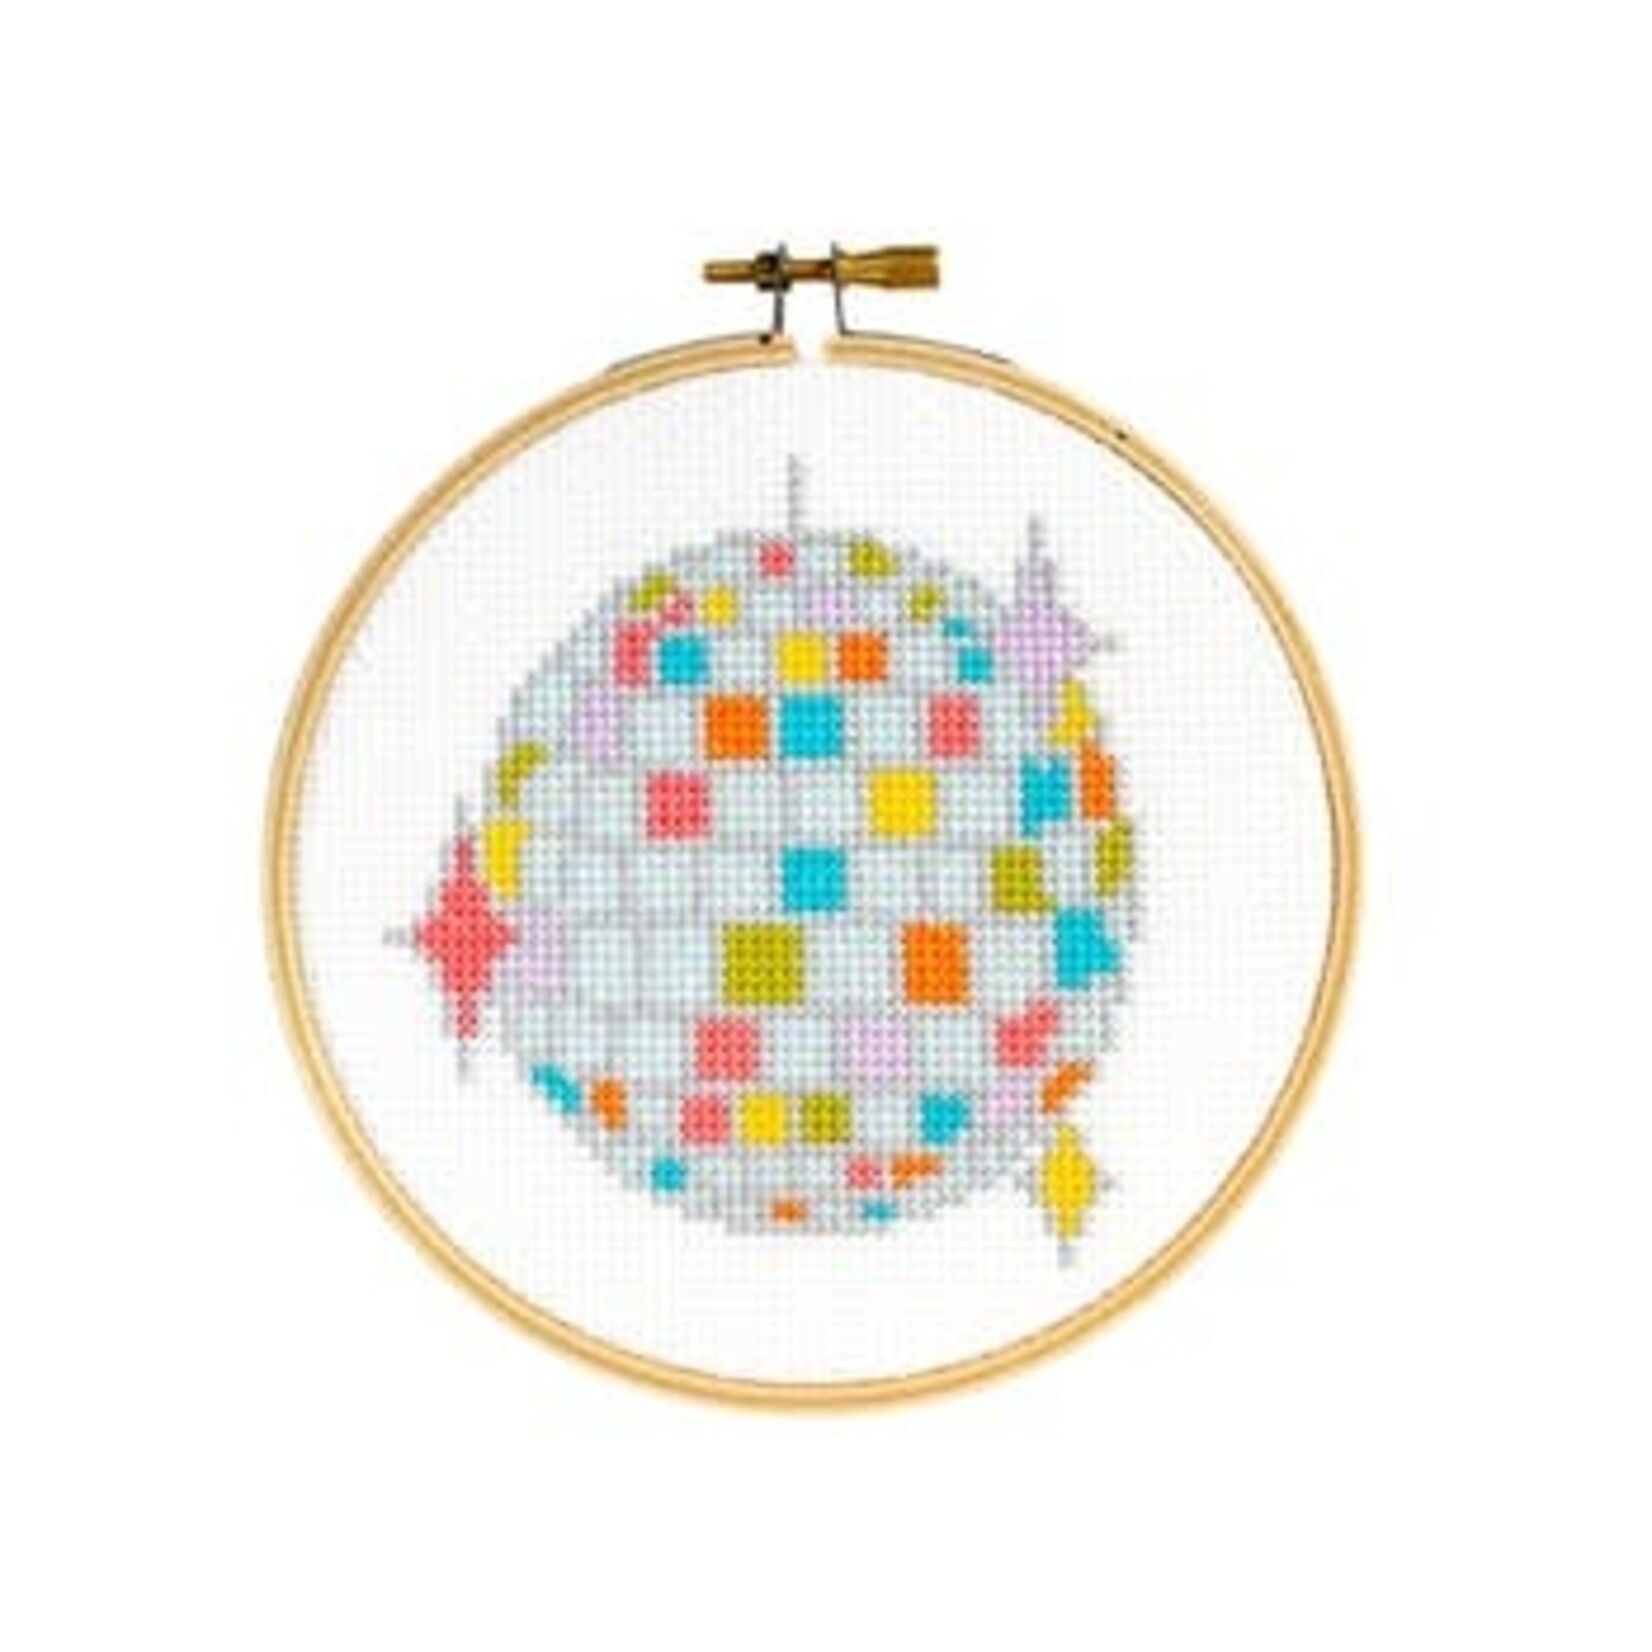 Stranded Cross Stitch Collection